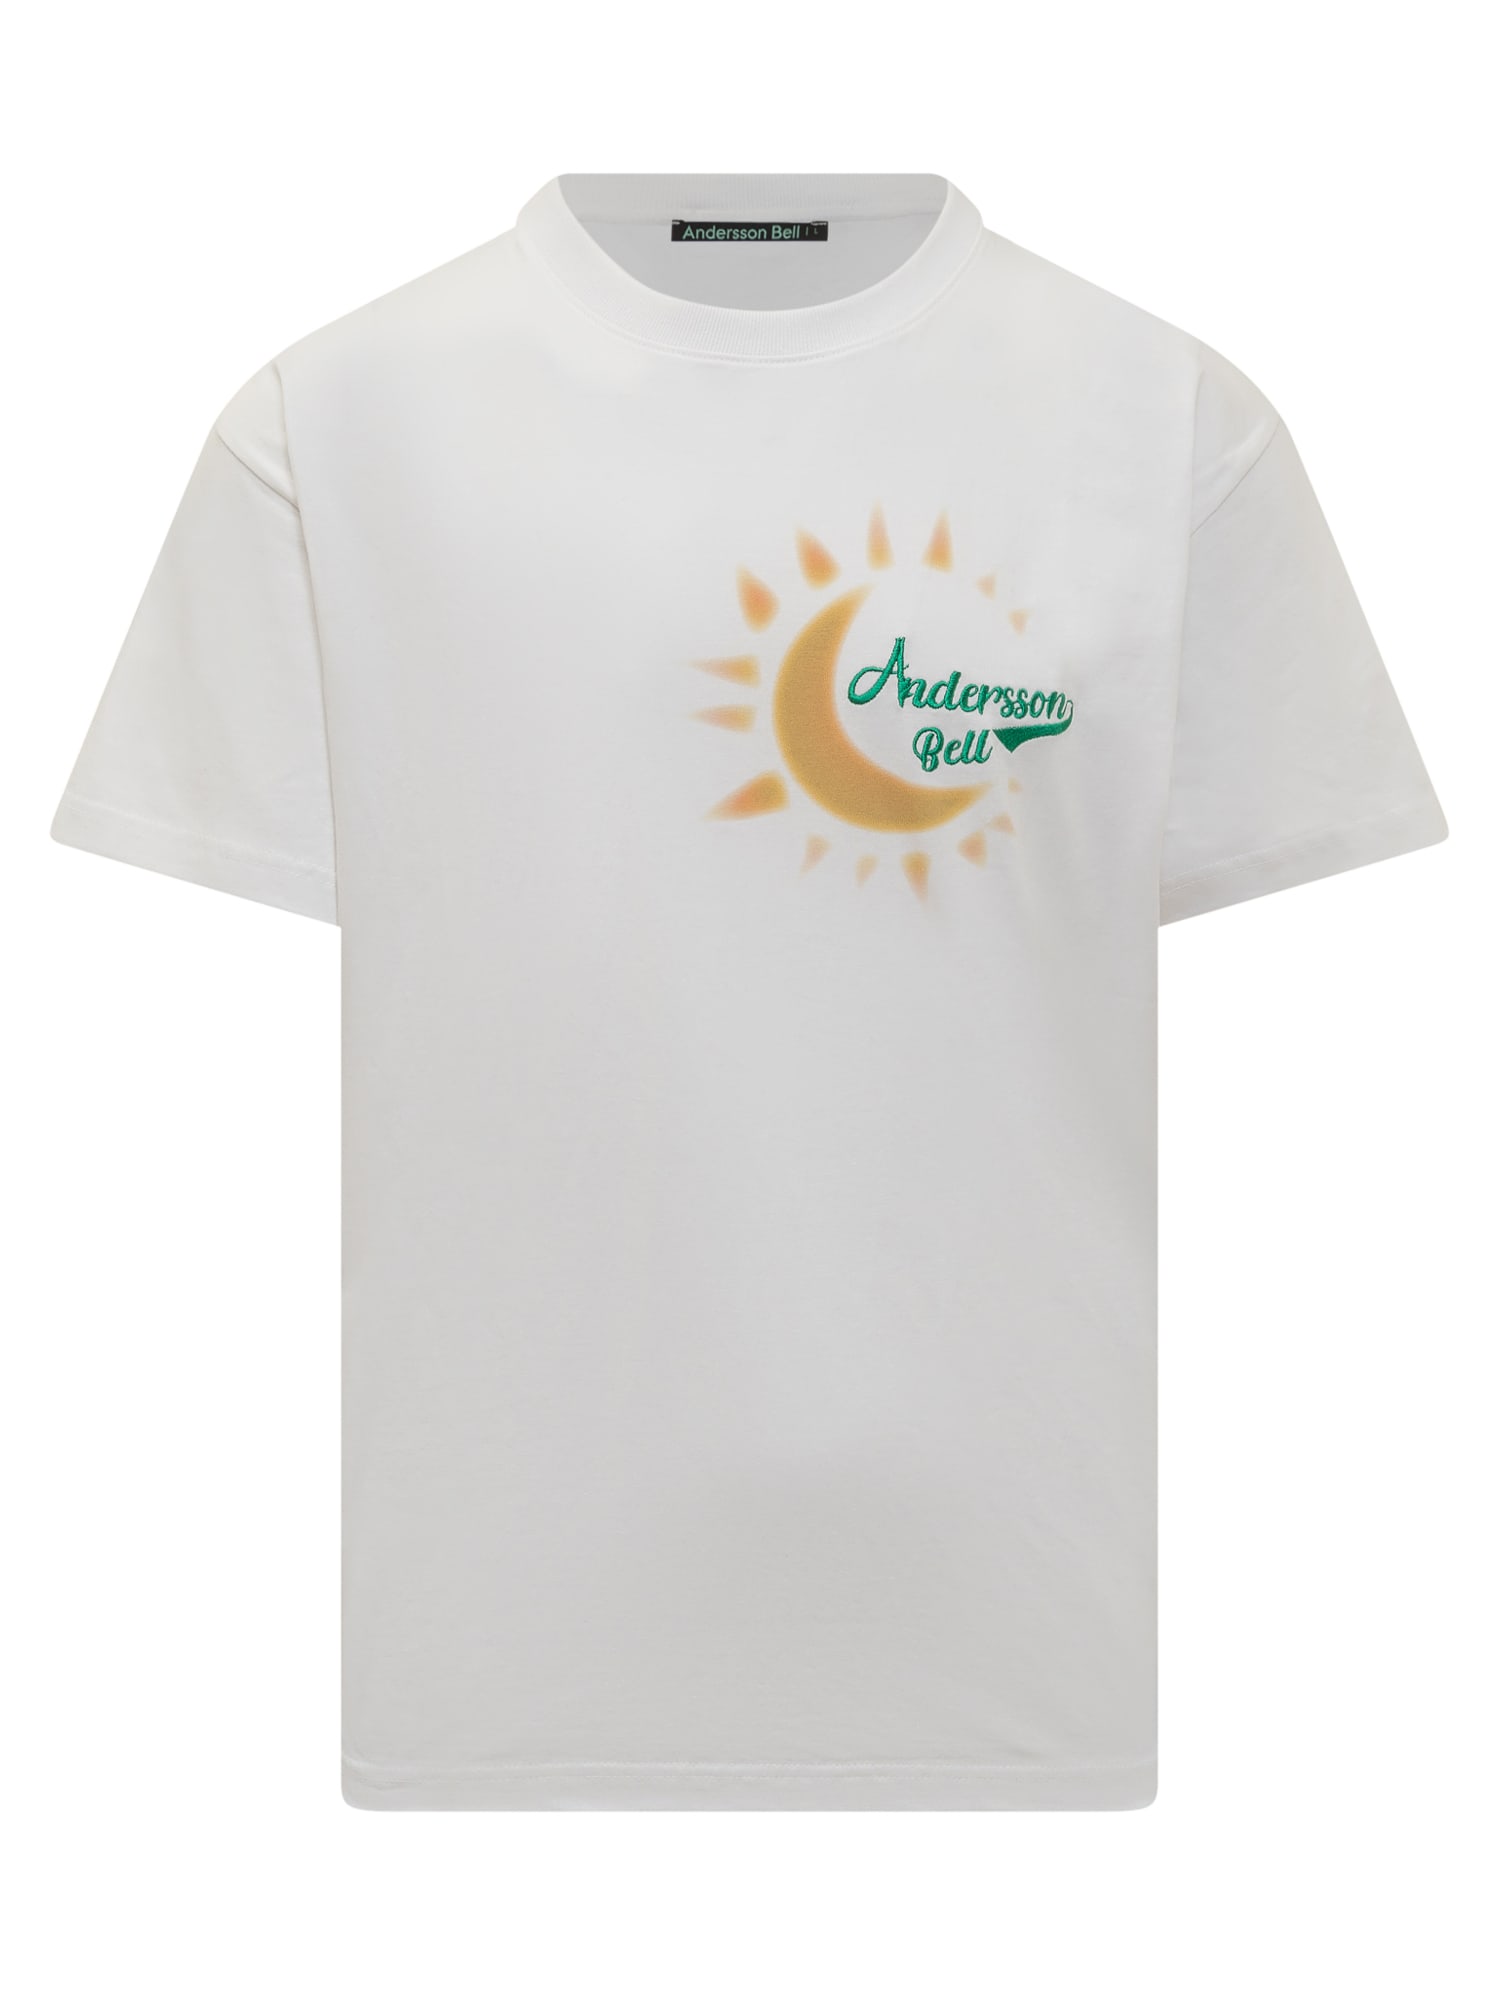 ANDERSSON BELL SUNNY T-SHIRT